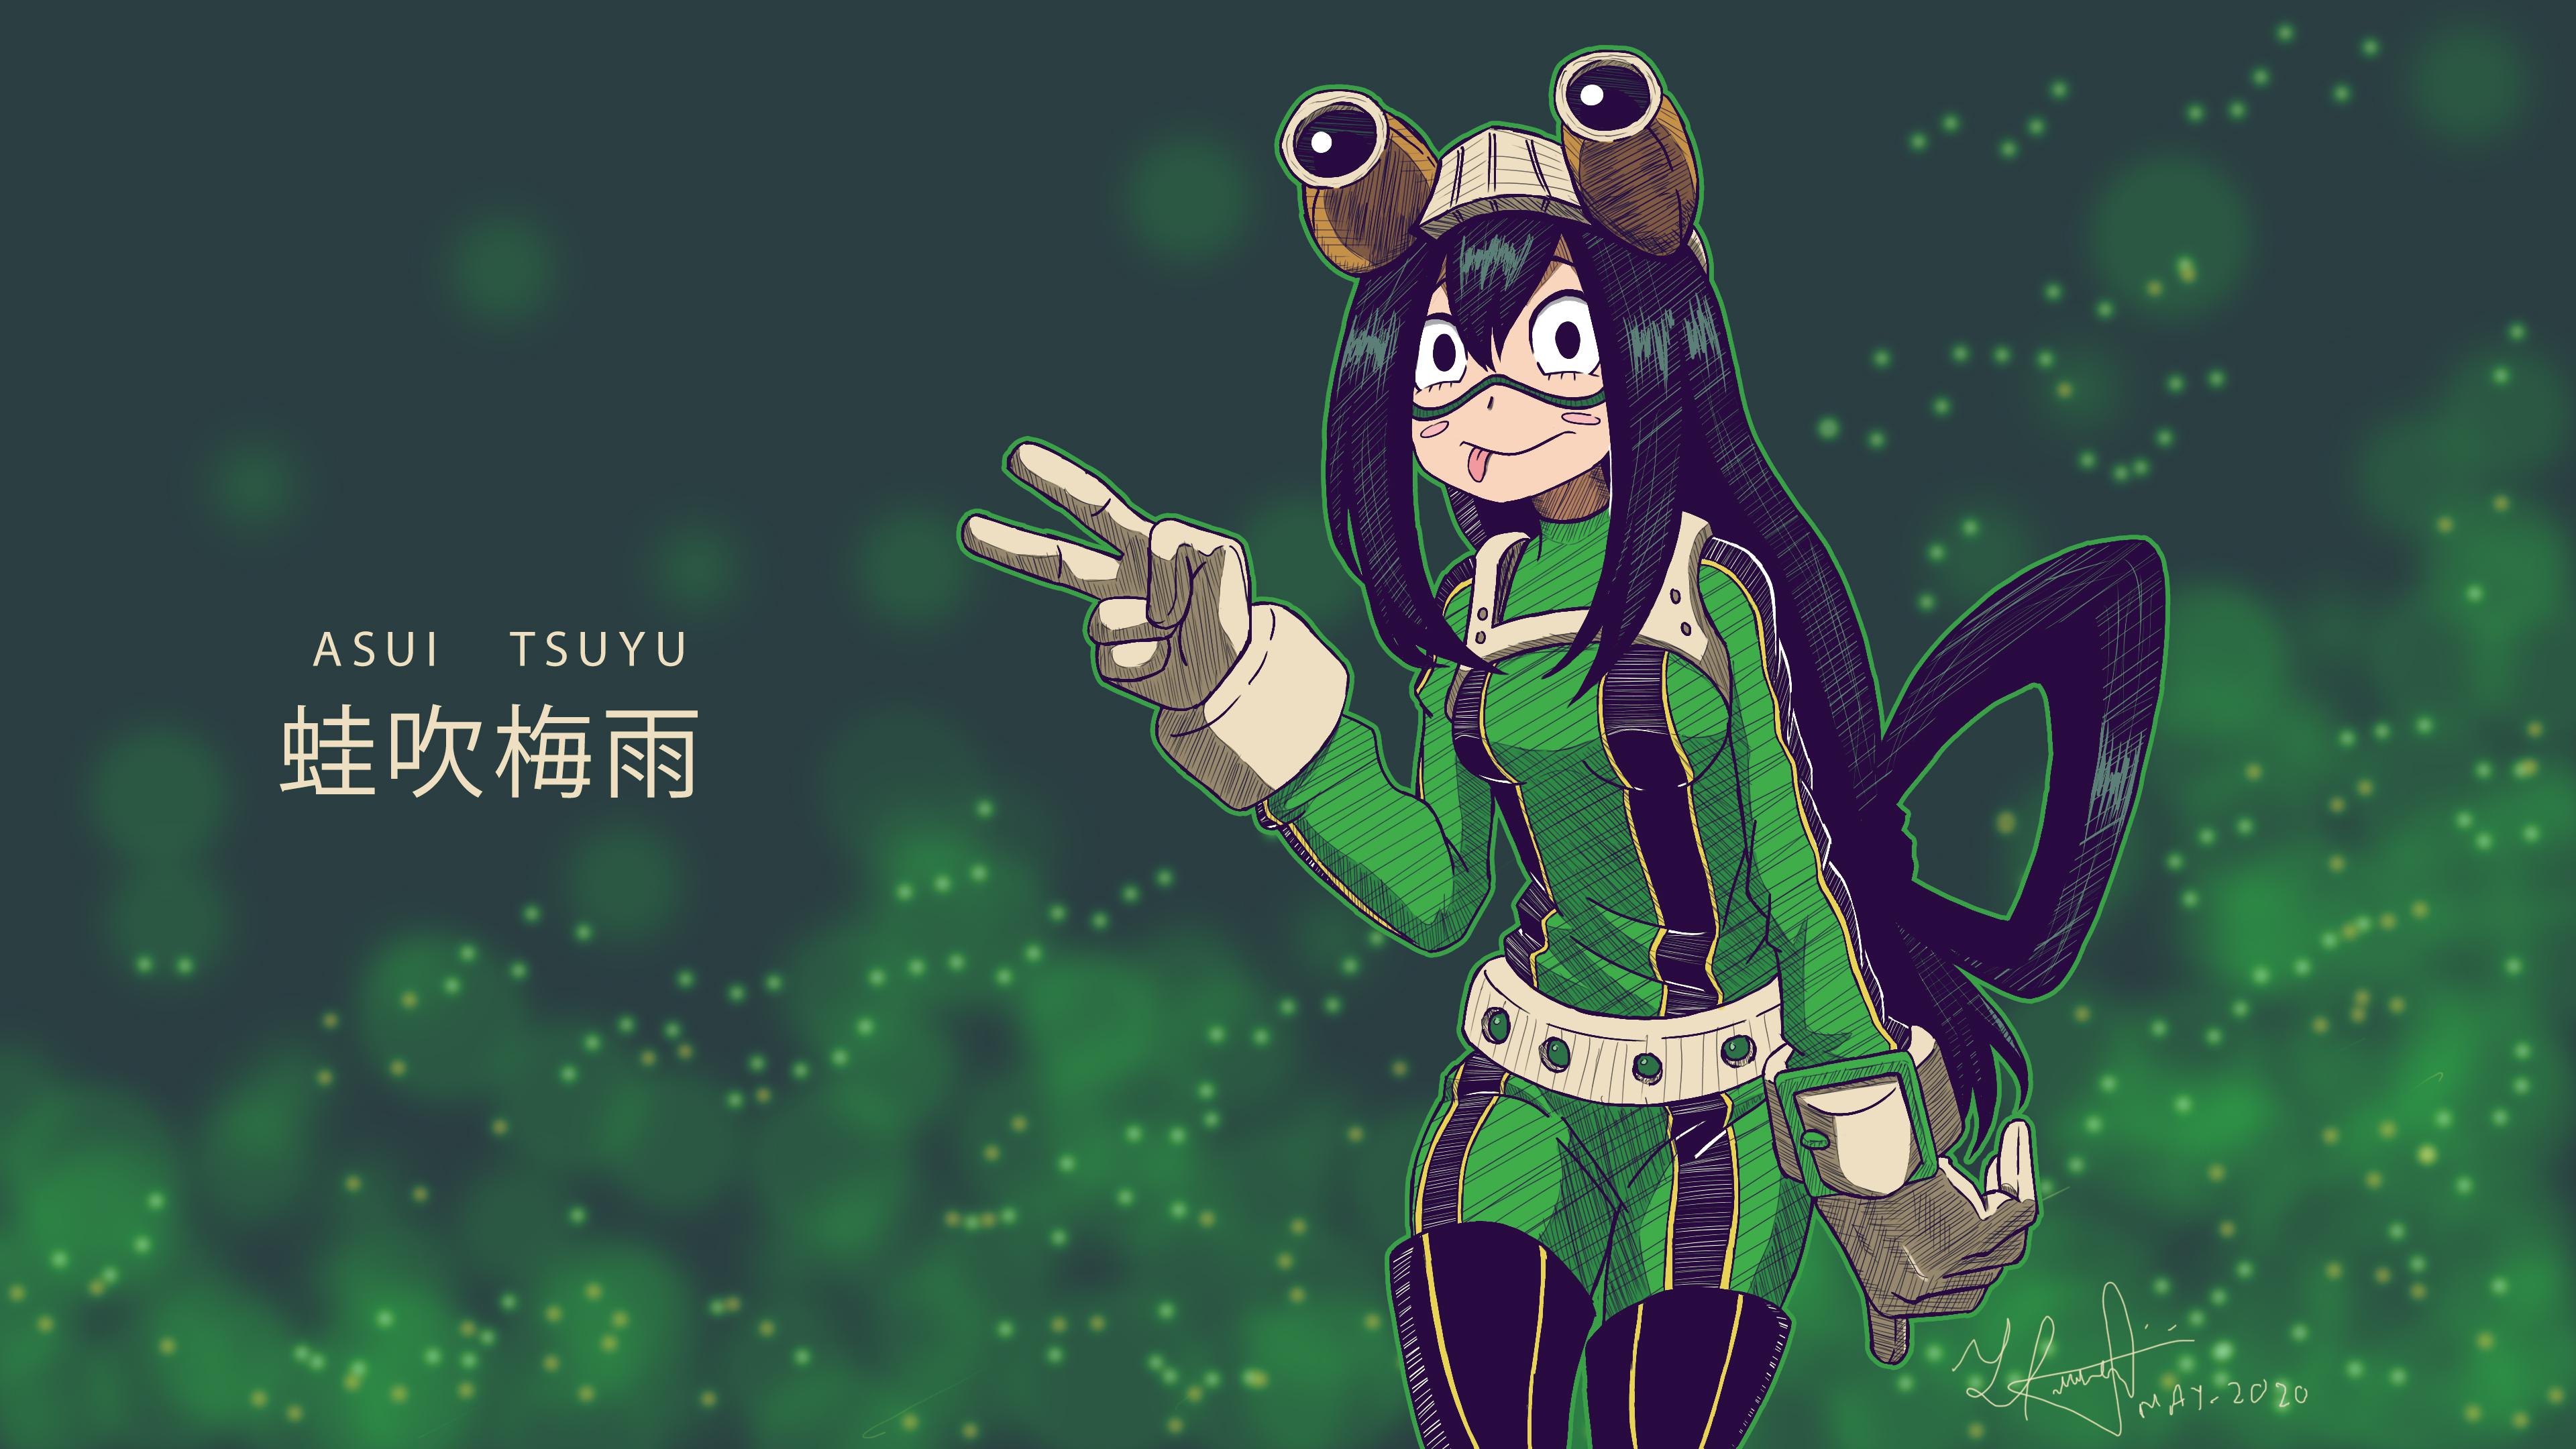 I drew a laptop wallpaper of Froppy! Feel free to use :)